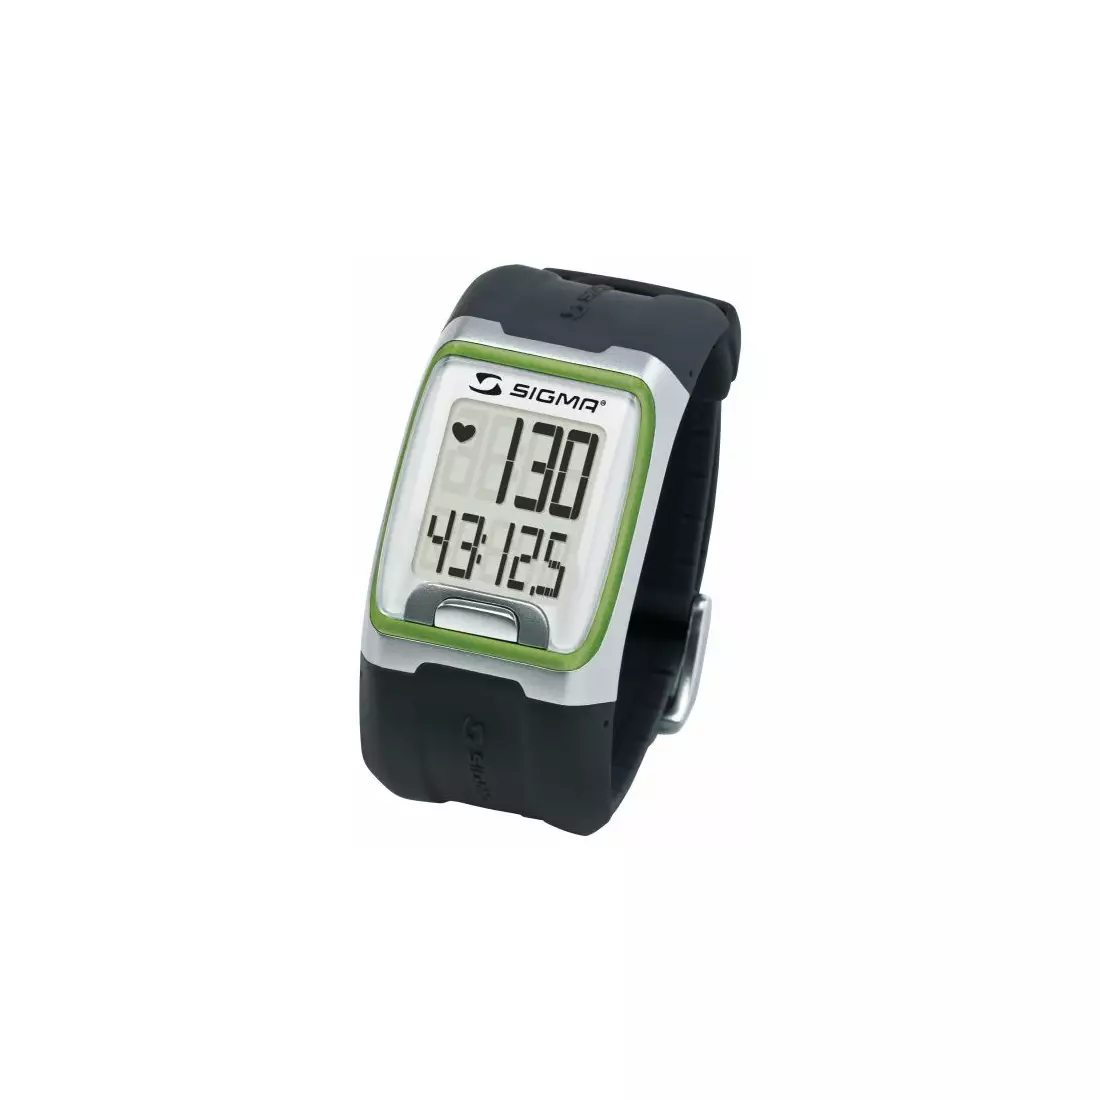 SIGMA SPORT PC 3.11 heart rate monitor - color: Black and green